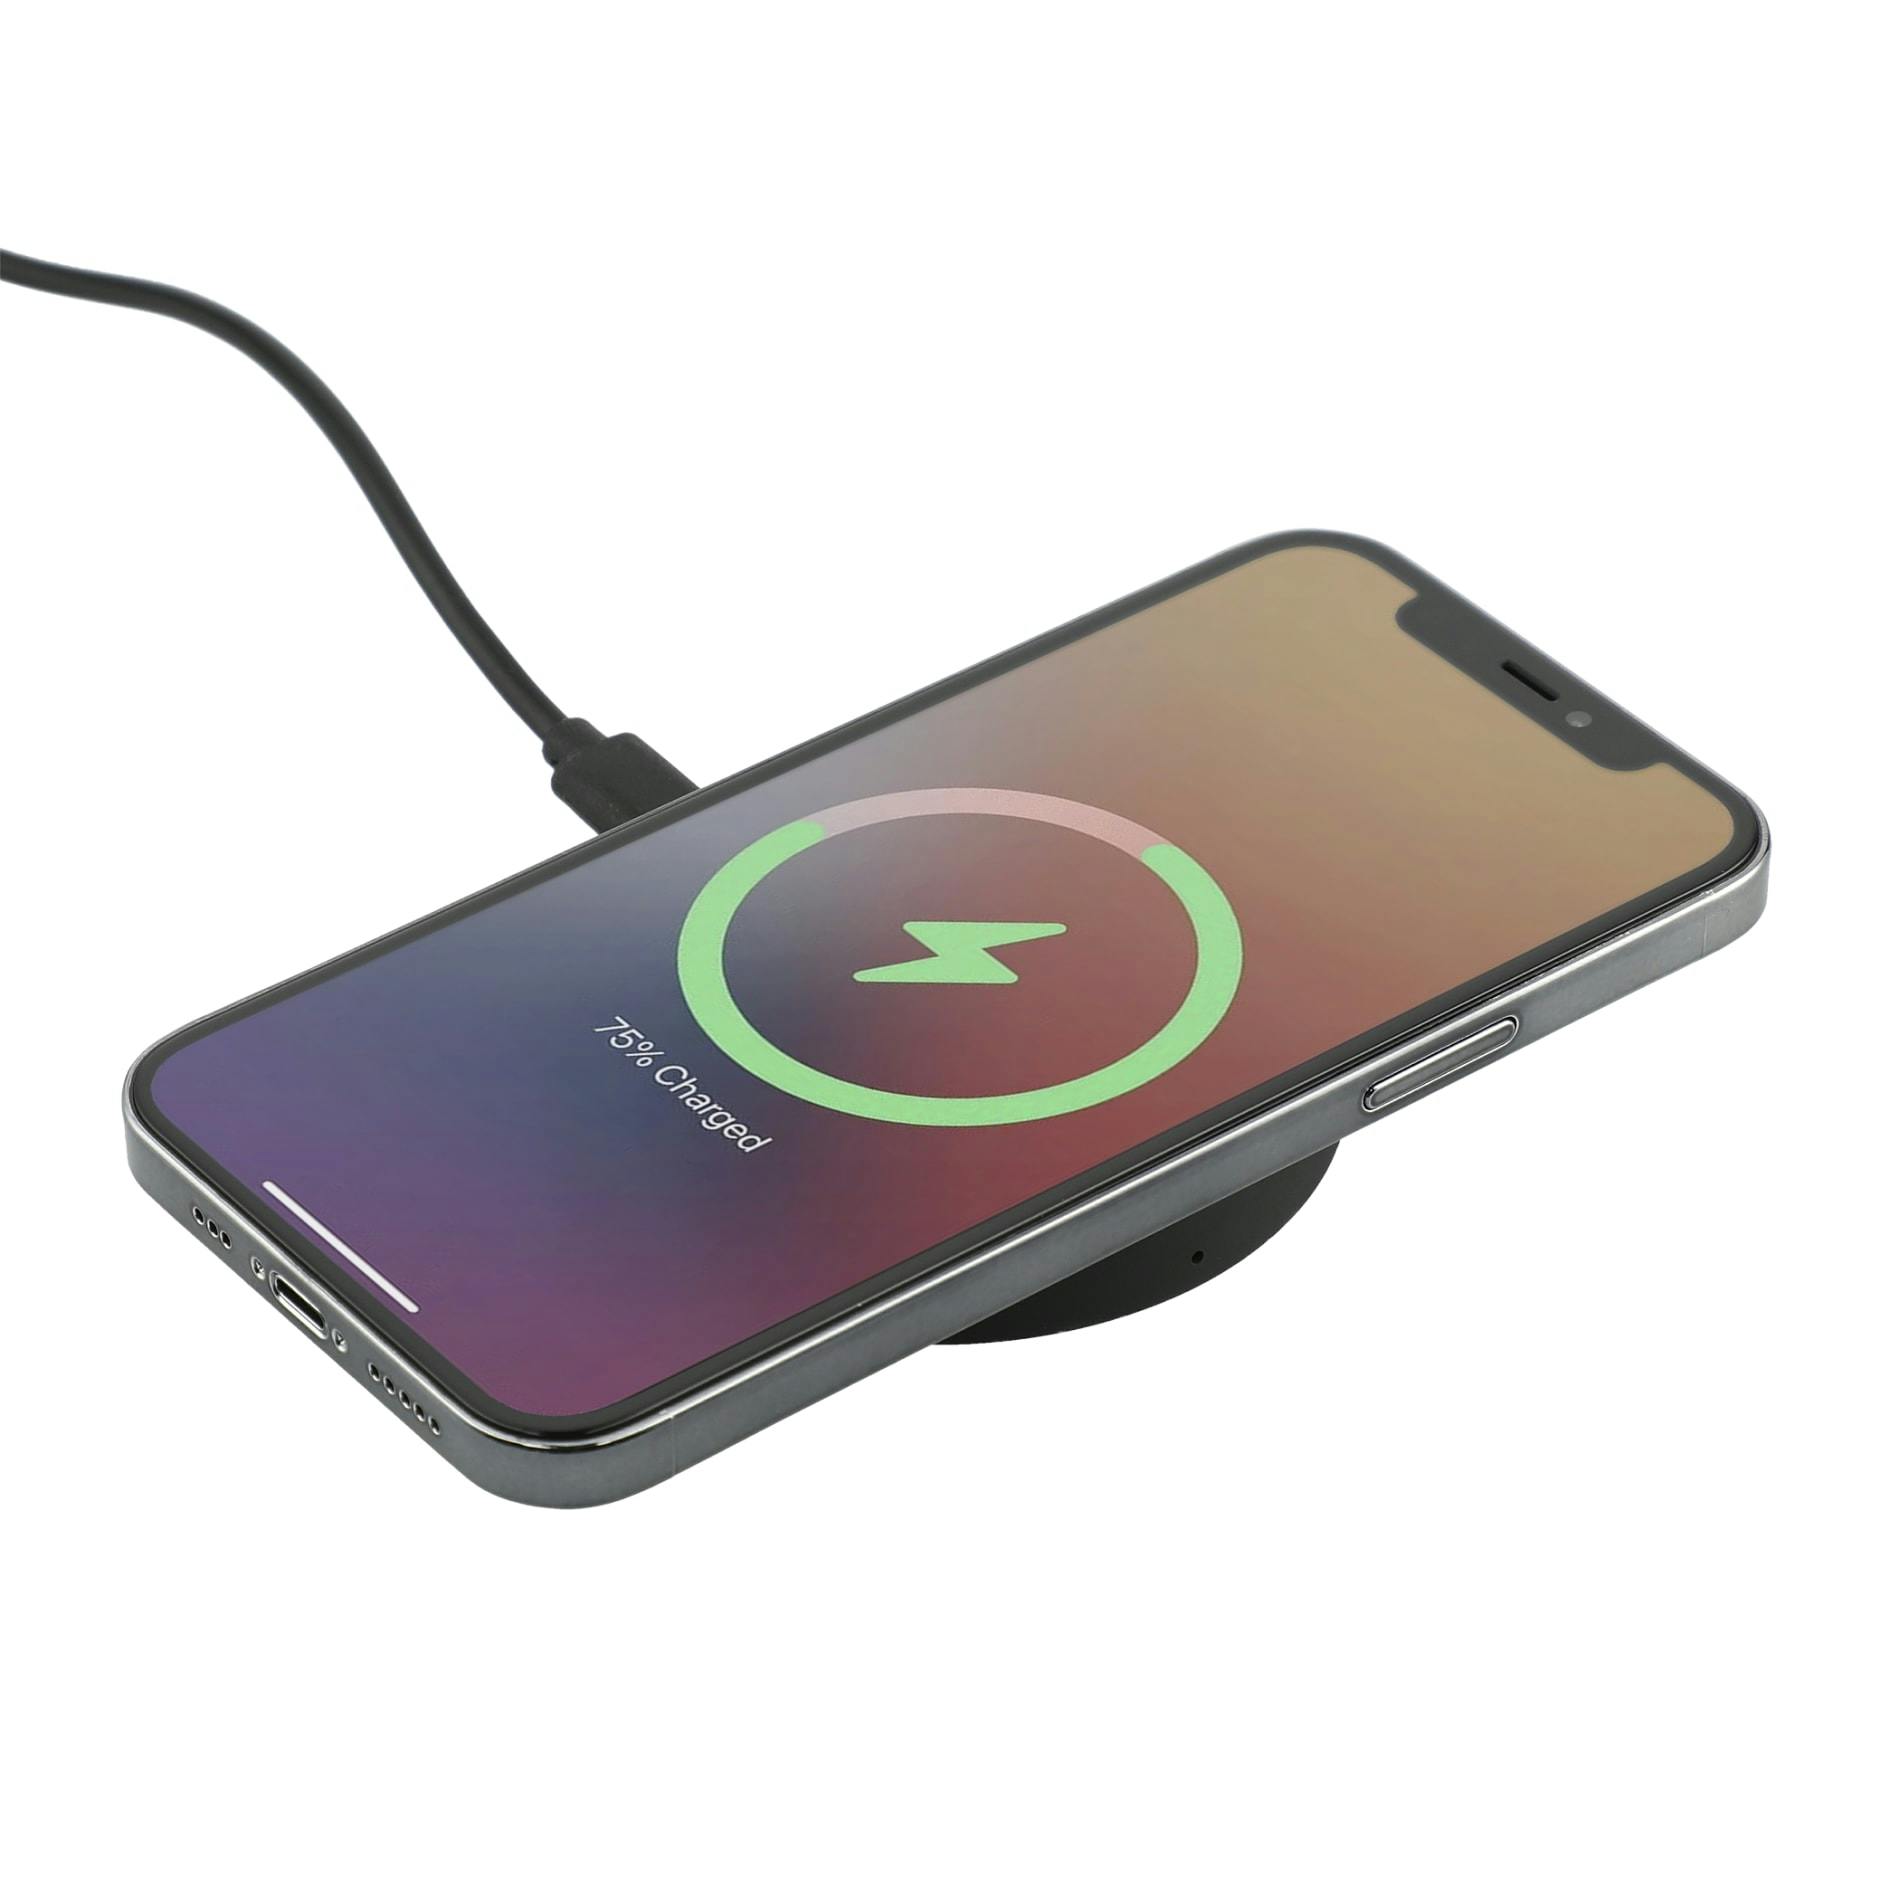 The Looking Glass Wireless Charging Pad - additional Image 1